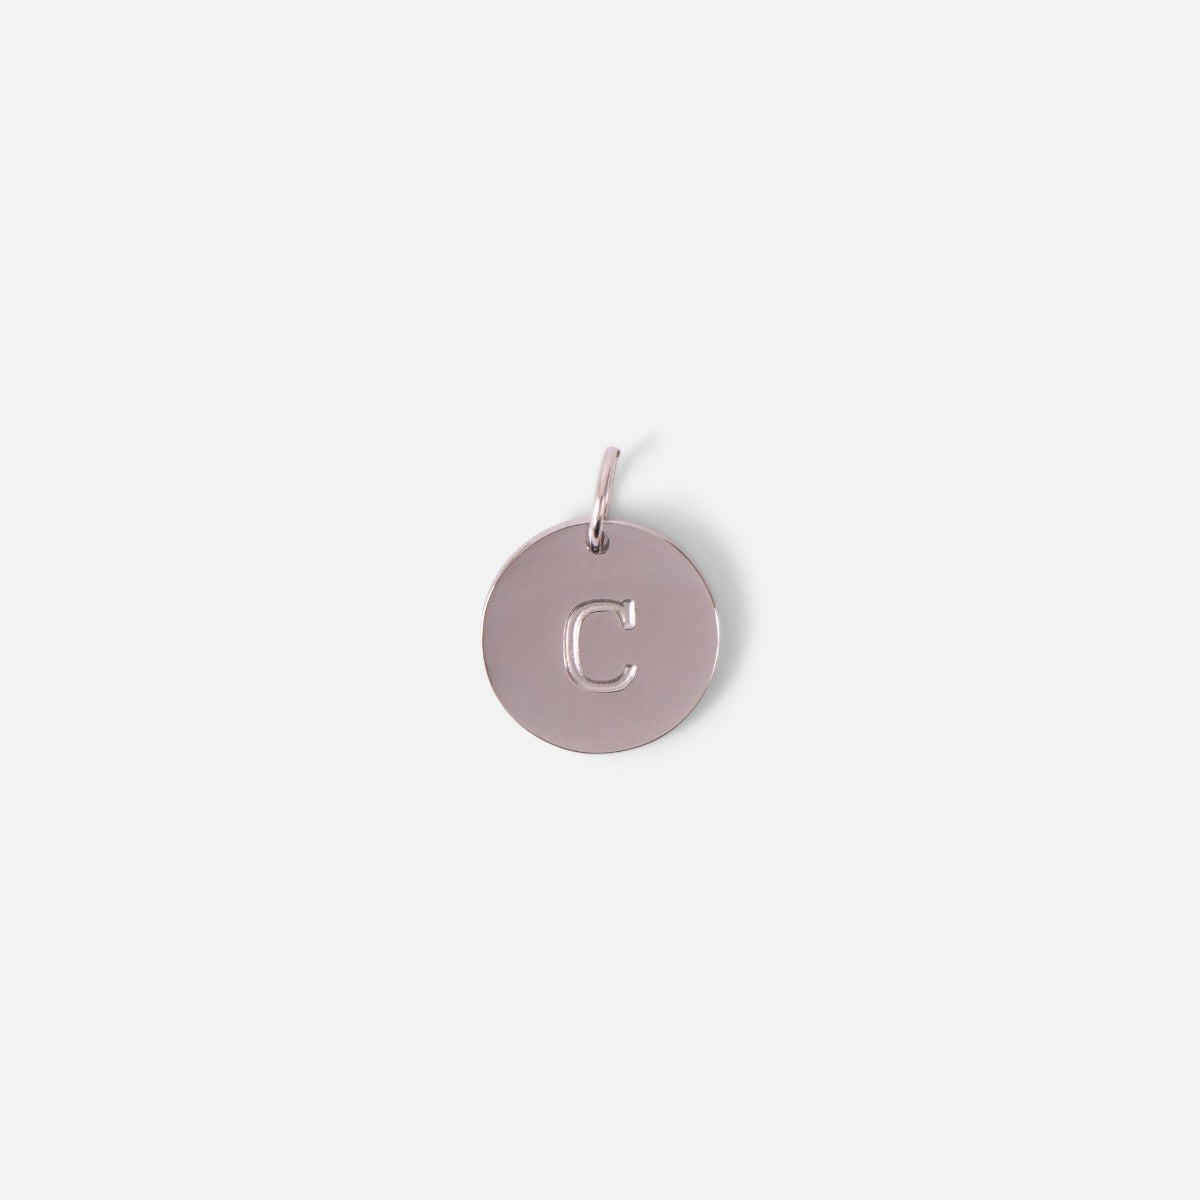 Small symbolic silvered charm engraved with the letter of the alphabet "c"